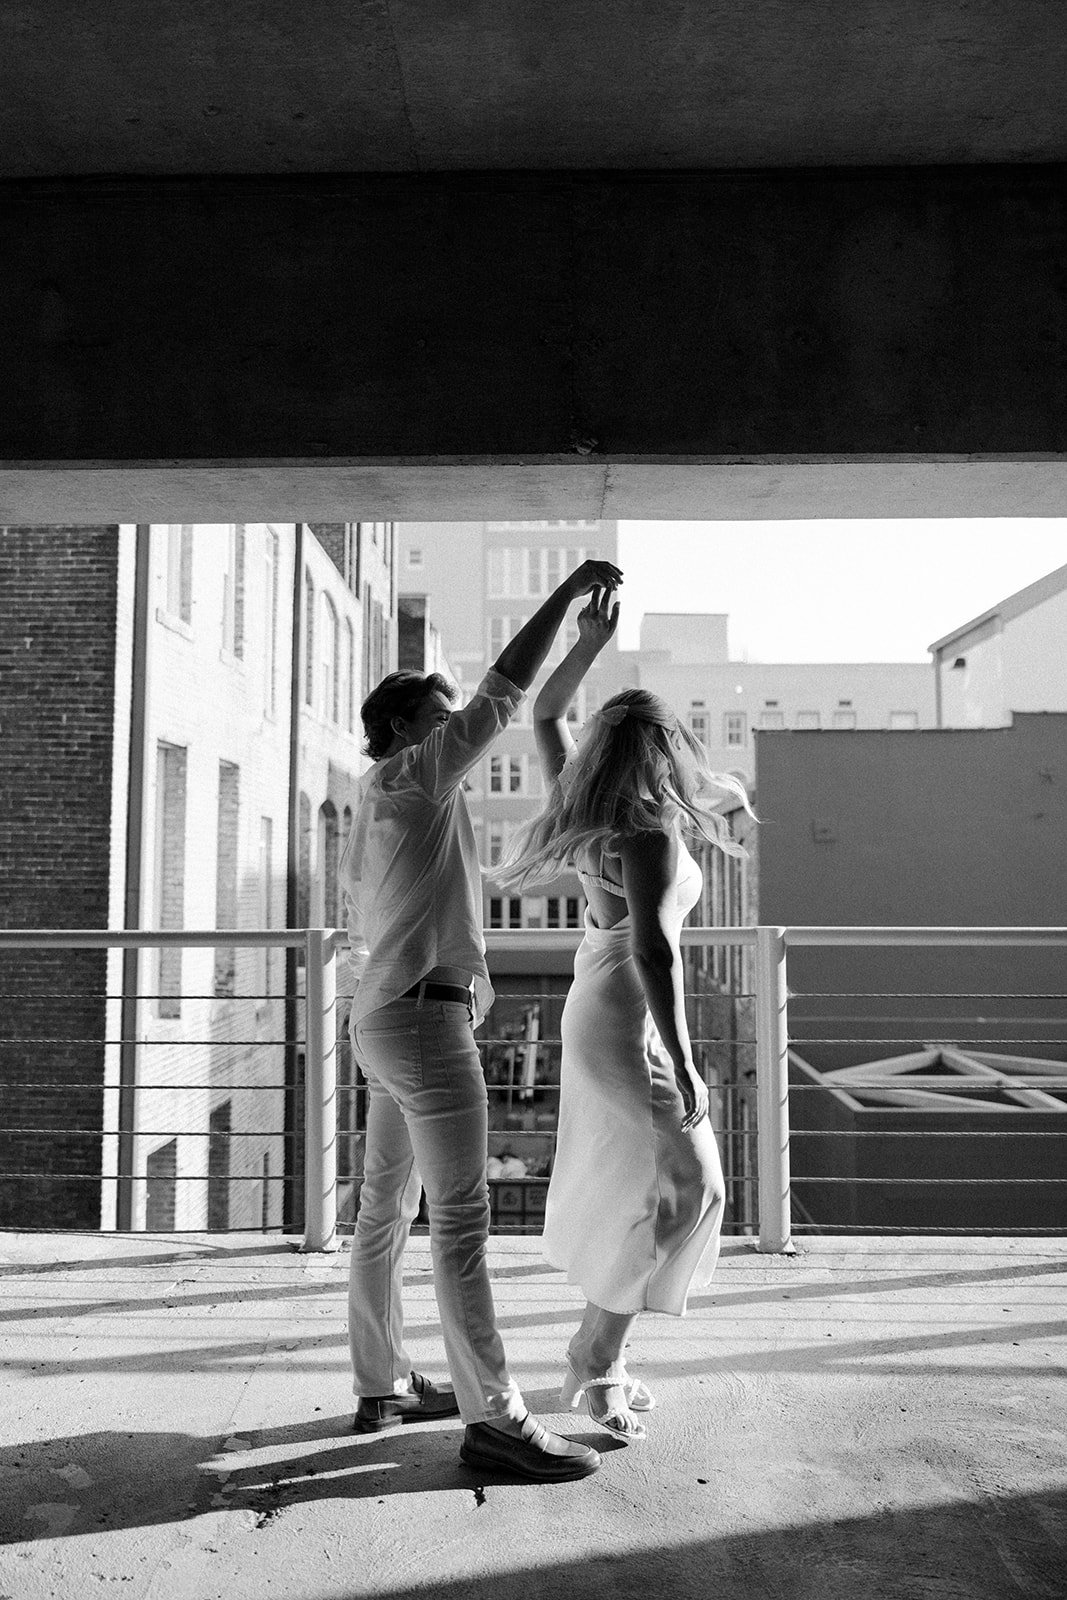 hannah-and-trey-parking-can-be-fun-downtown-memphis-river-walk-mississippi-beach-tennessee-wedding-photographer-jo-darling-photography-4.jpg